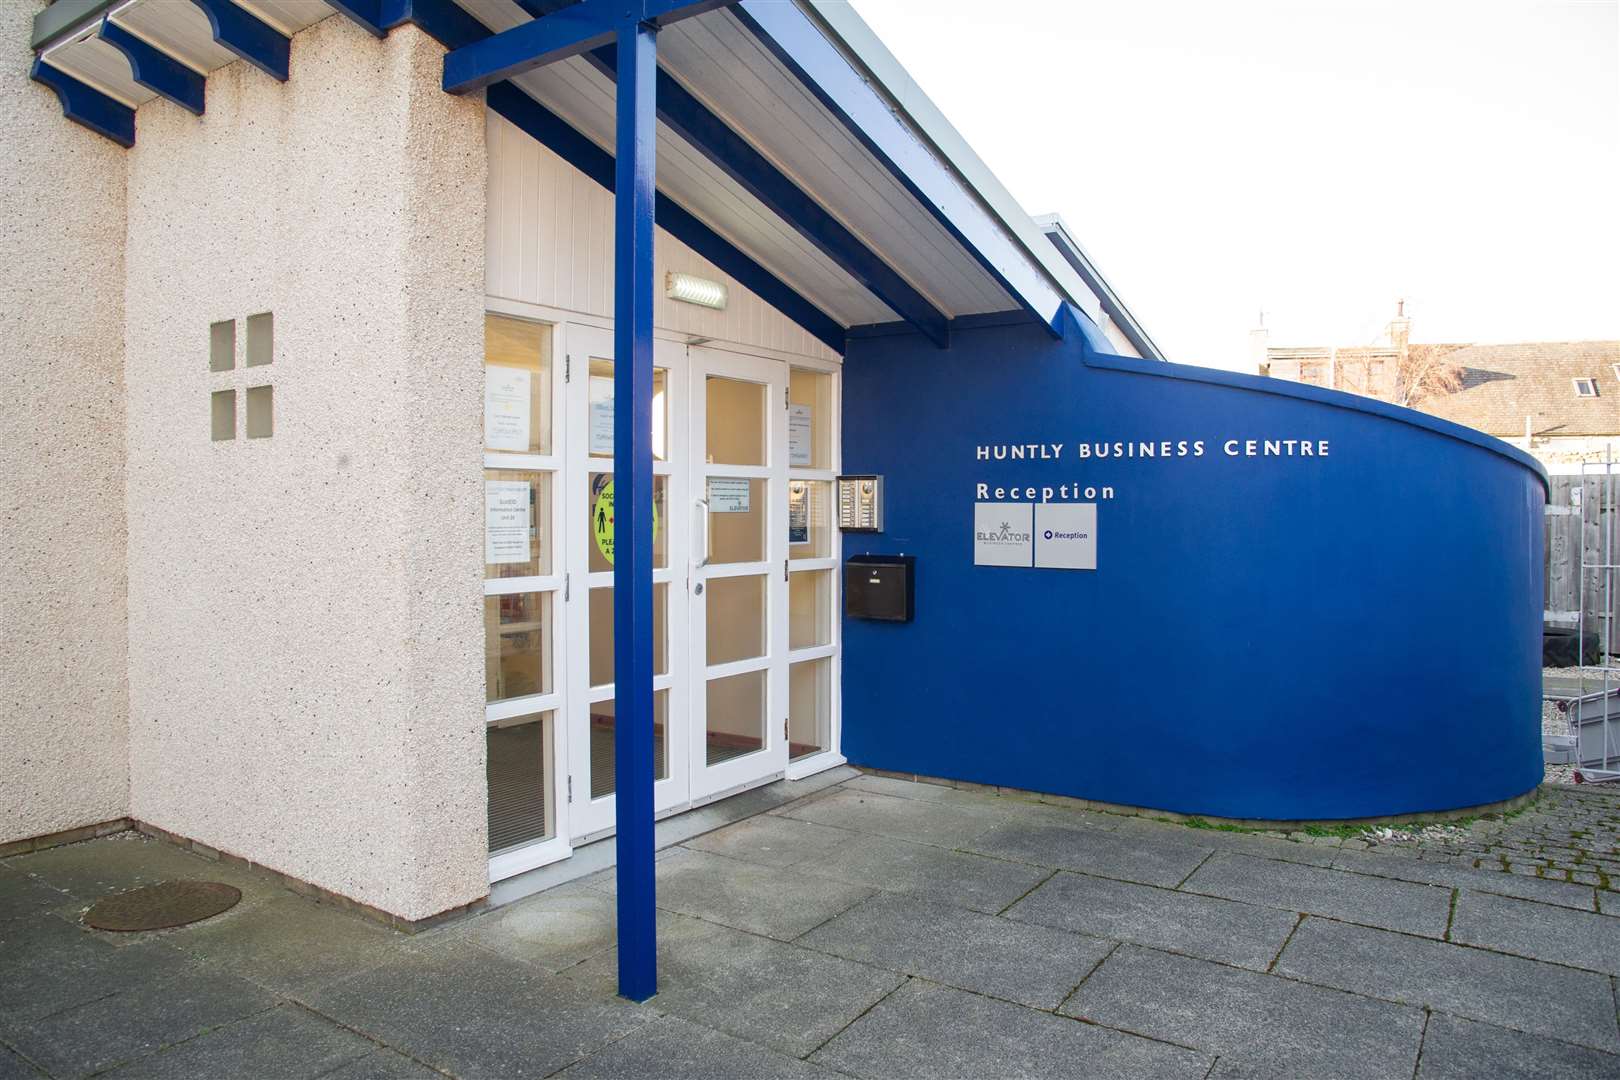 Huntly Business Centre on Gordon Street where the new hub is located. Picture: Daniel Forsyth.